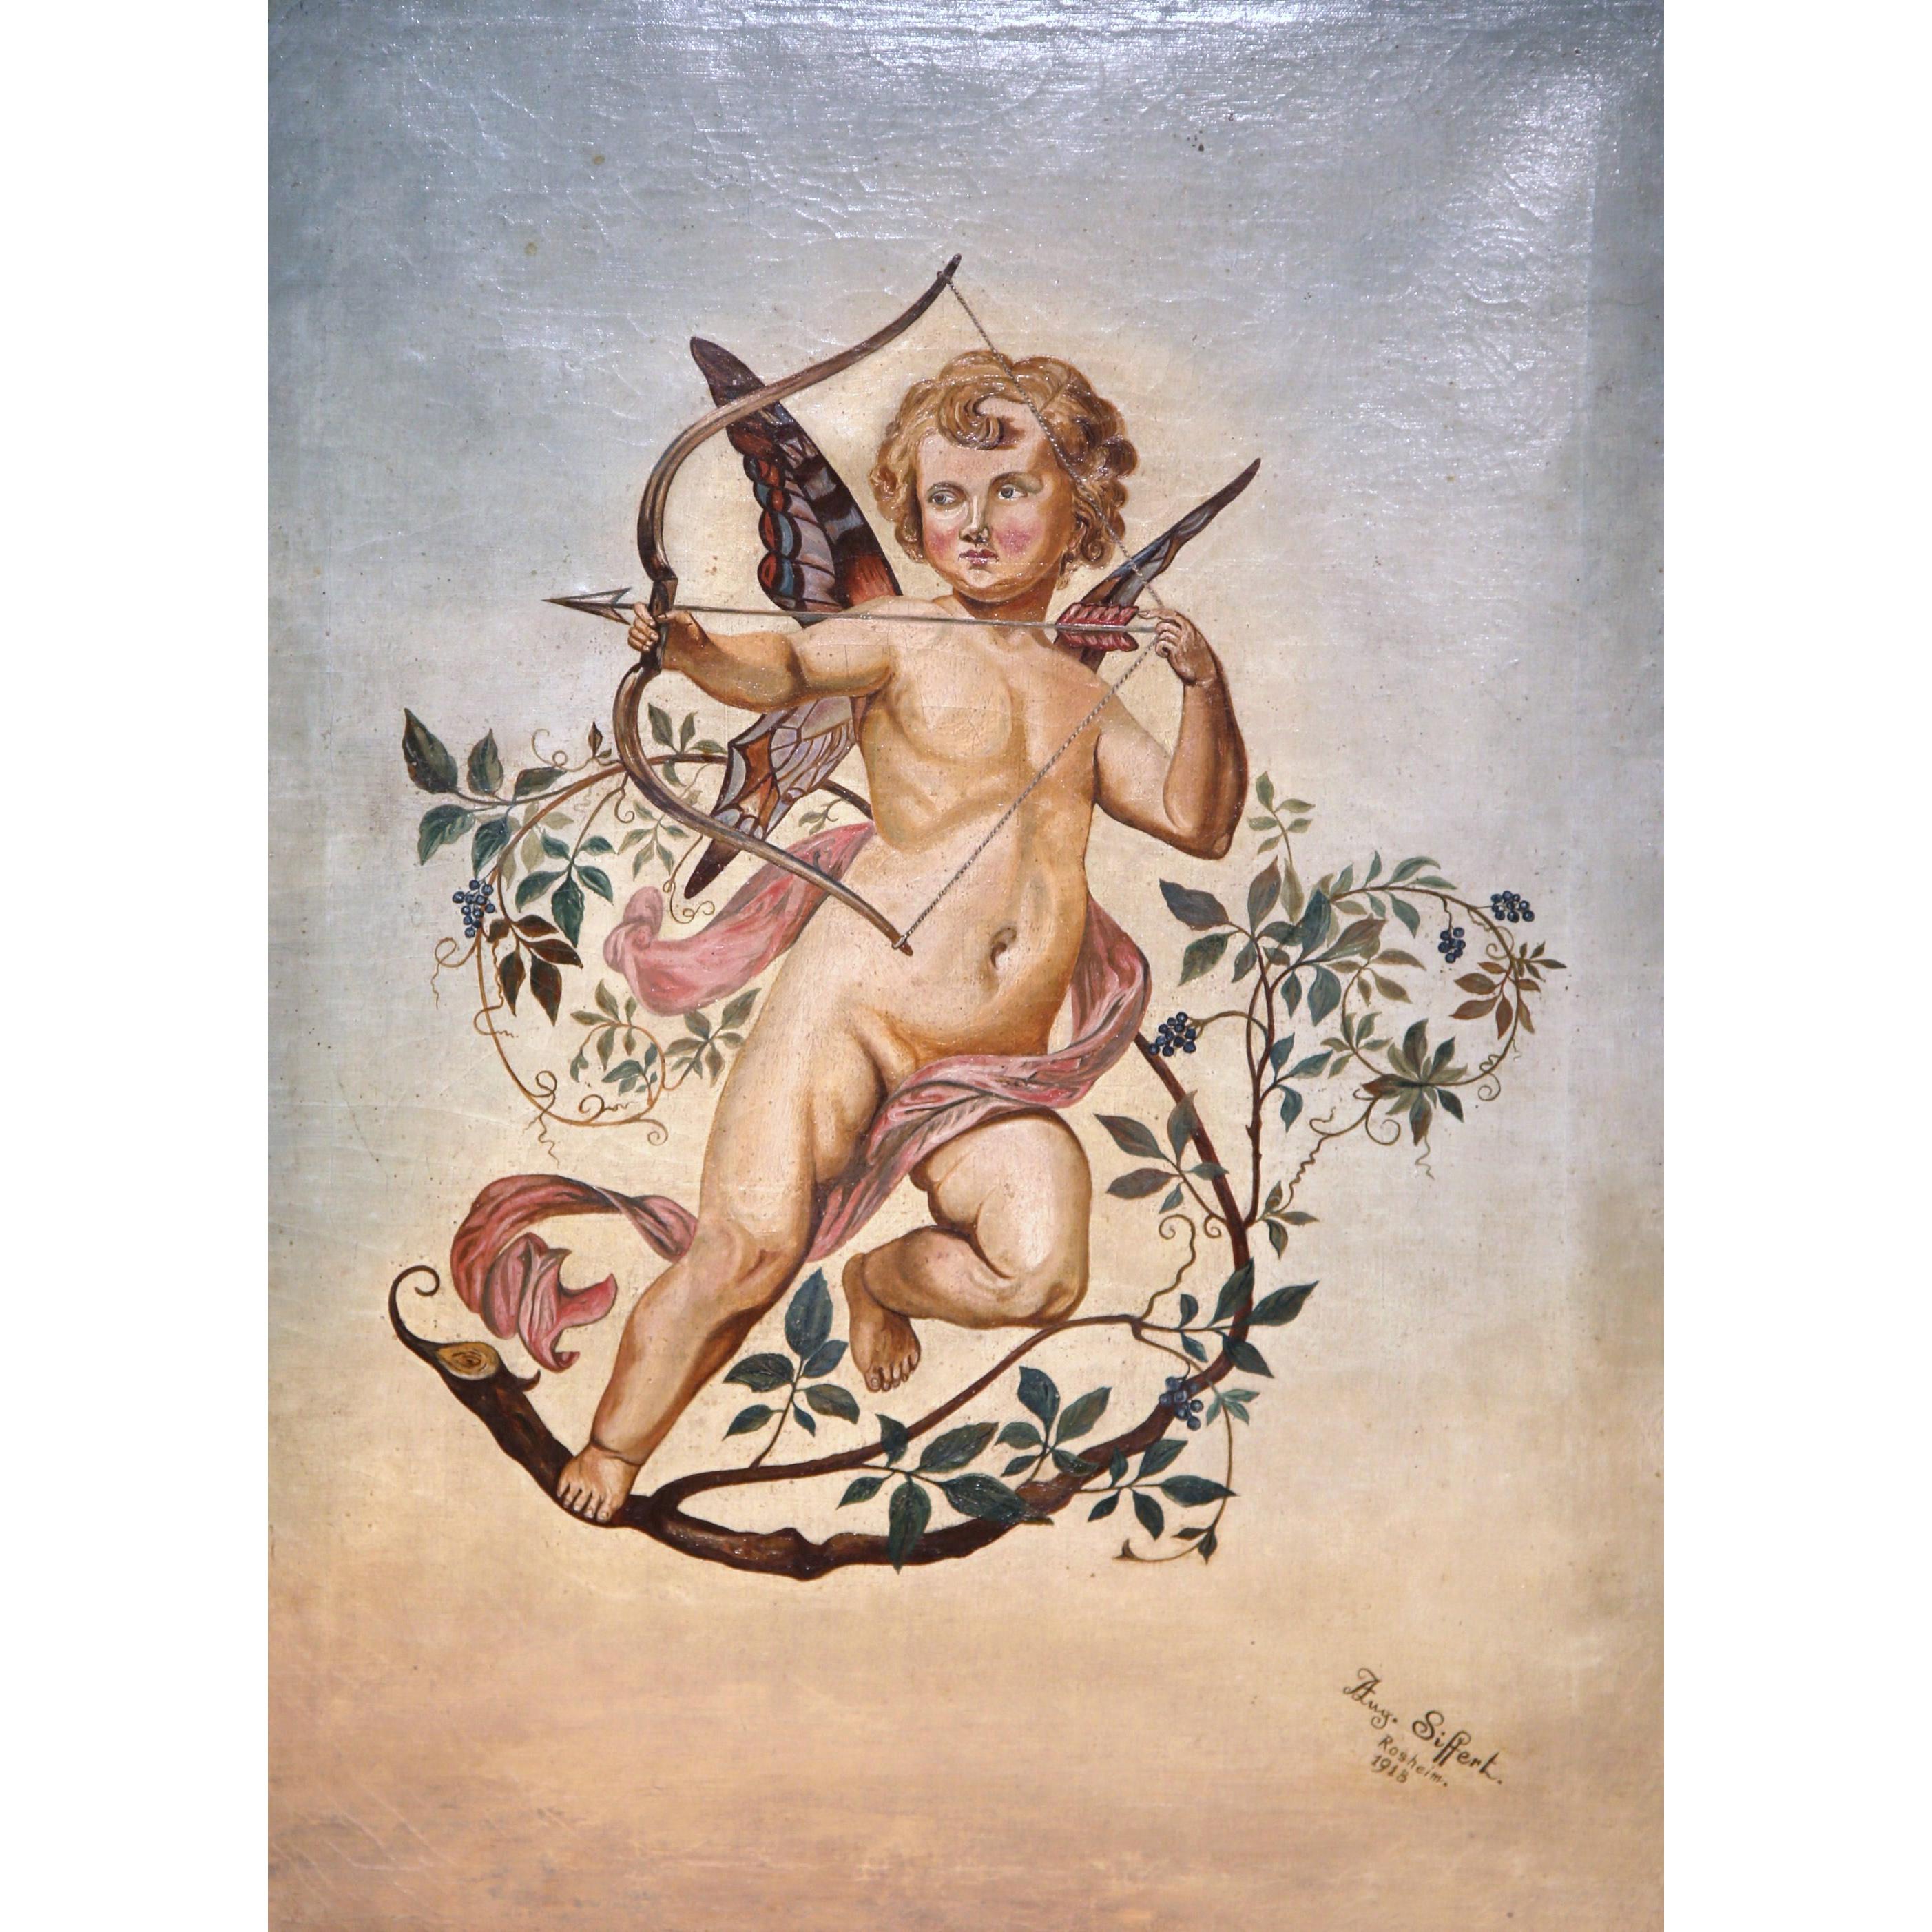 Signed and dated Siffert, 1913, the artwork depicts a stylized, flying cherub standing on a branch while shooting his bow and arrow. As the Classic story goes, cherub and cupid figures shoot arrows to strike unknowing people and have them fall in